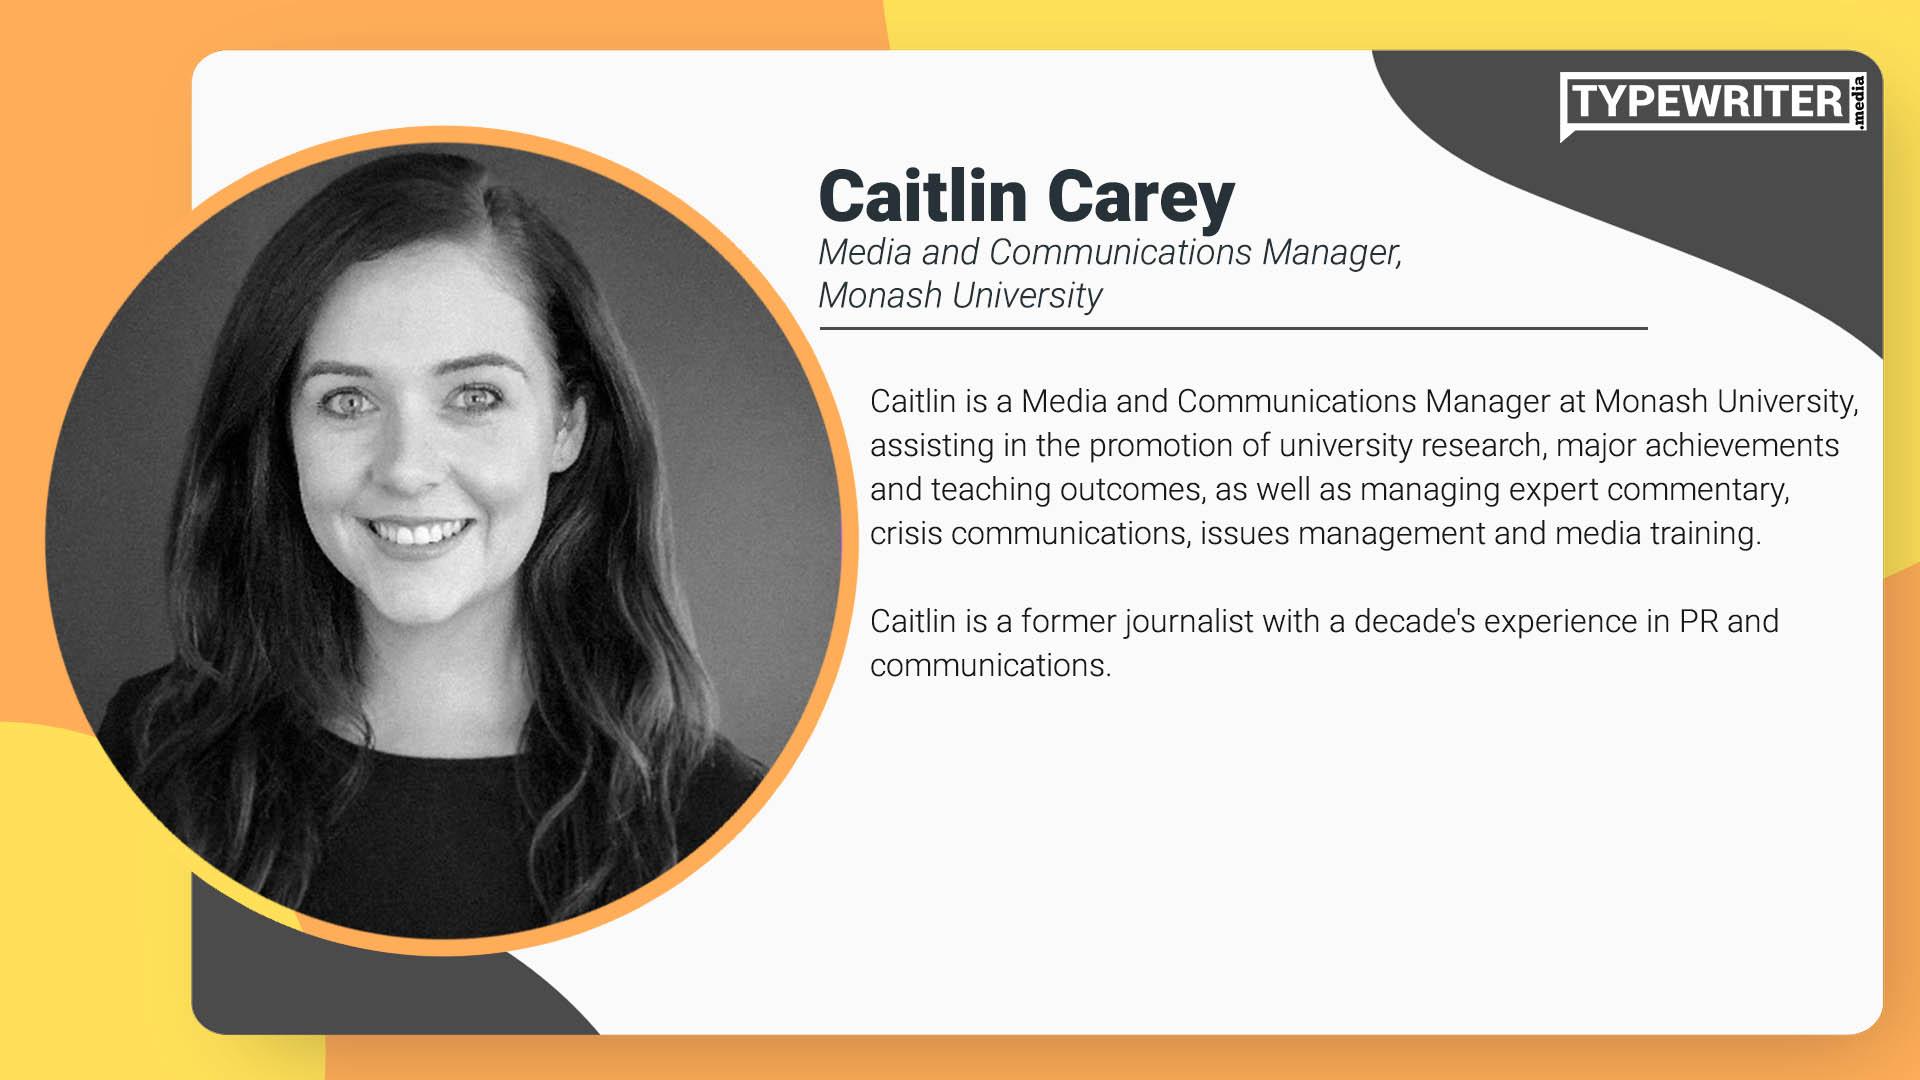 women leader in public relations/communications - caitlin carey